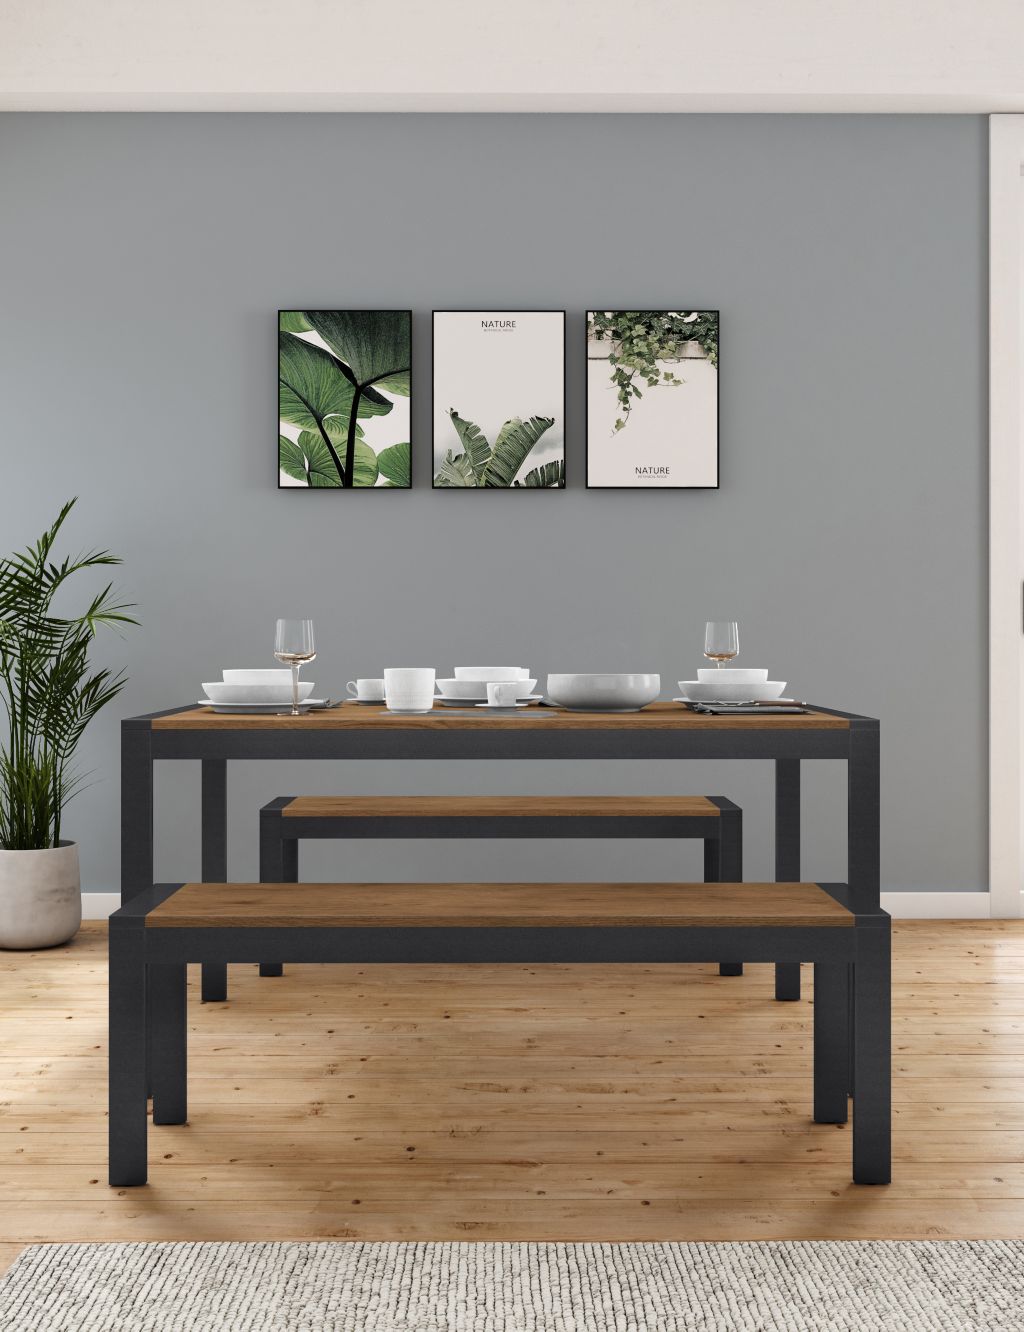 Brookland 6 Seater Dining Table with Benches image 1